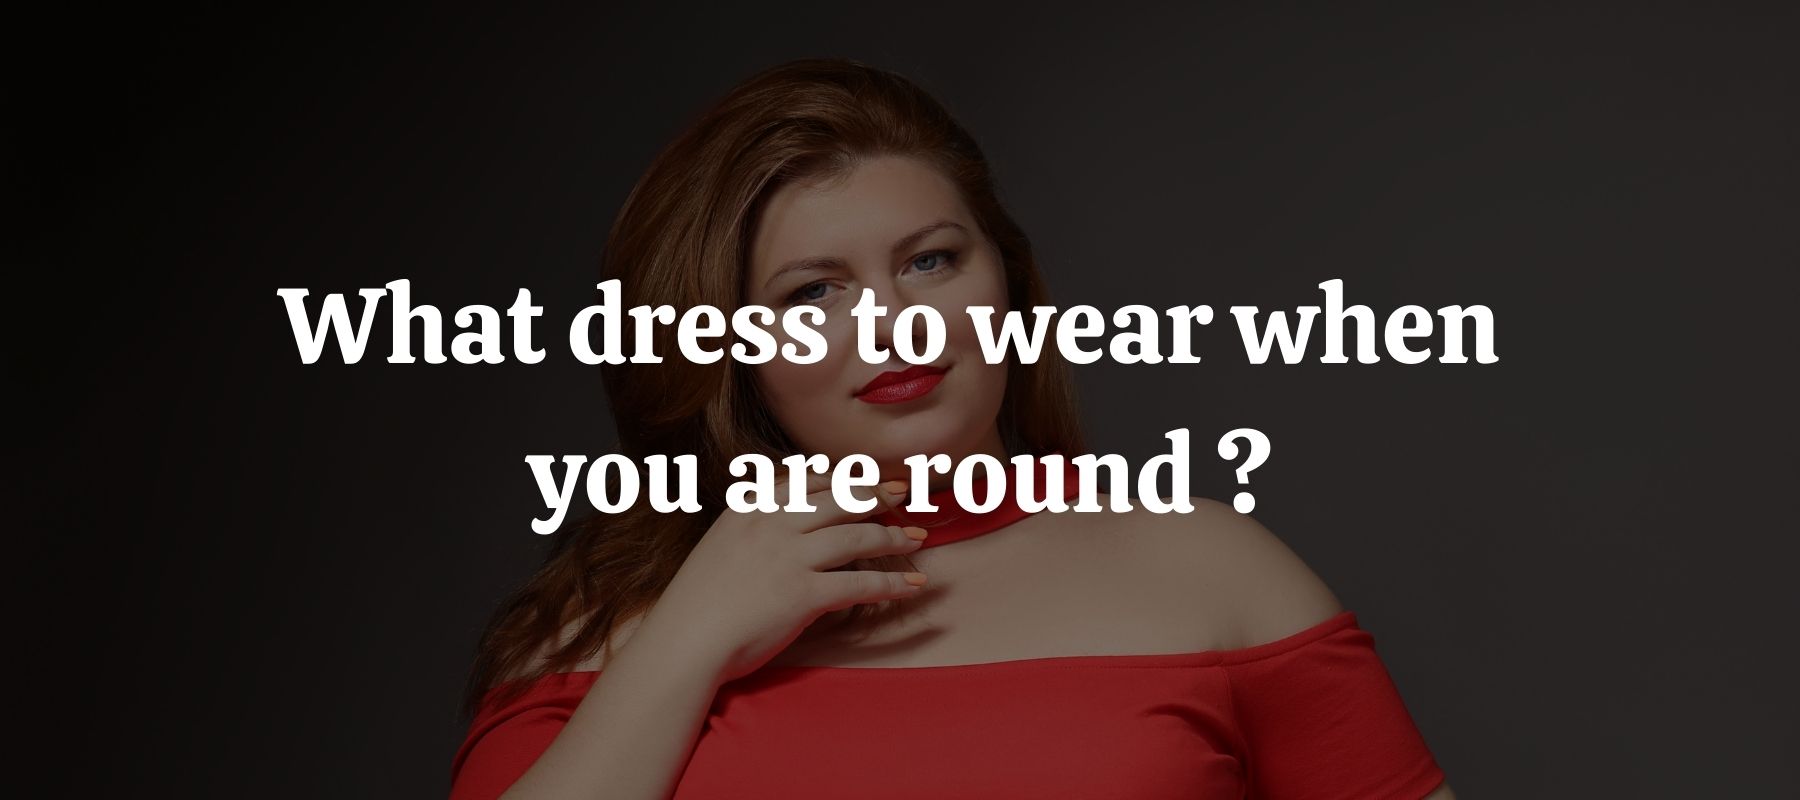 What dress to wear when you are round